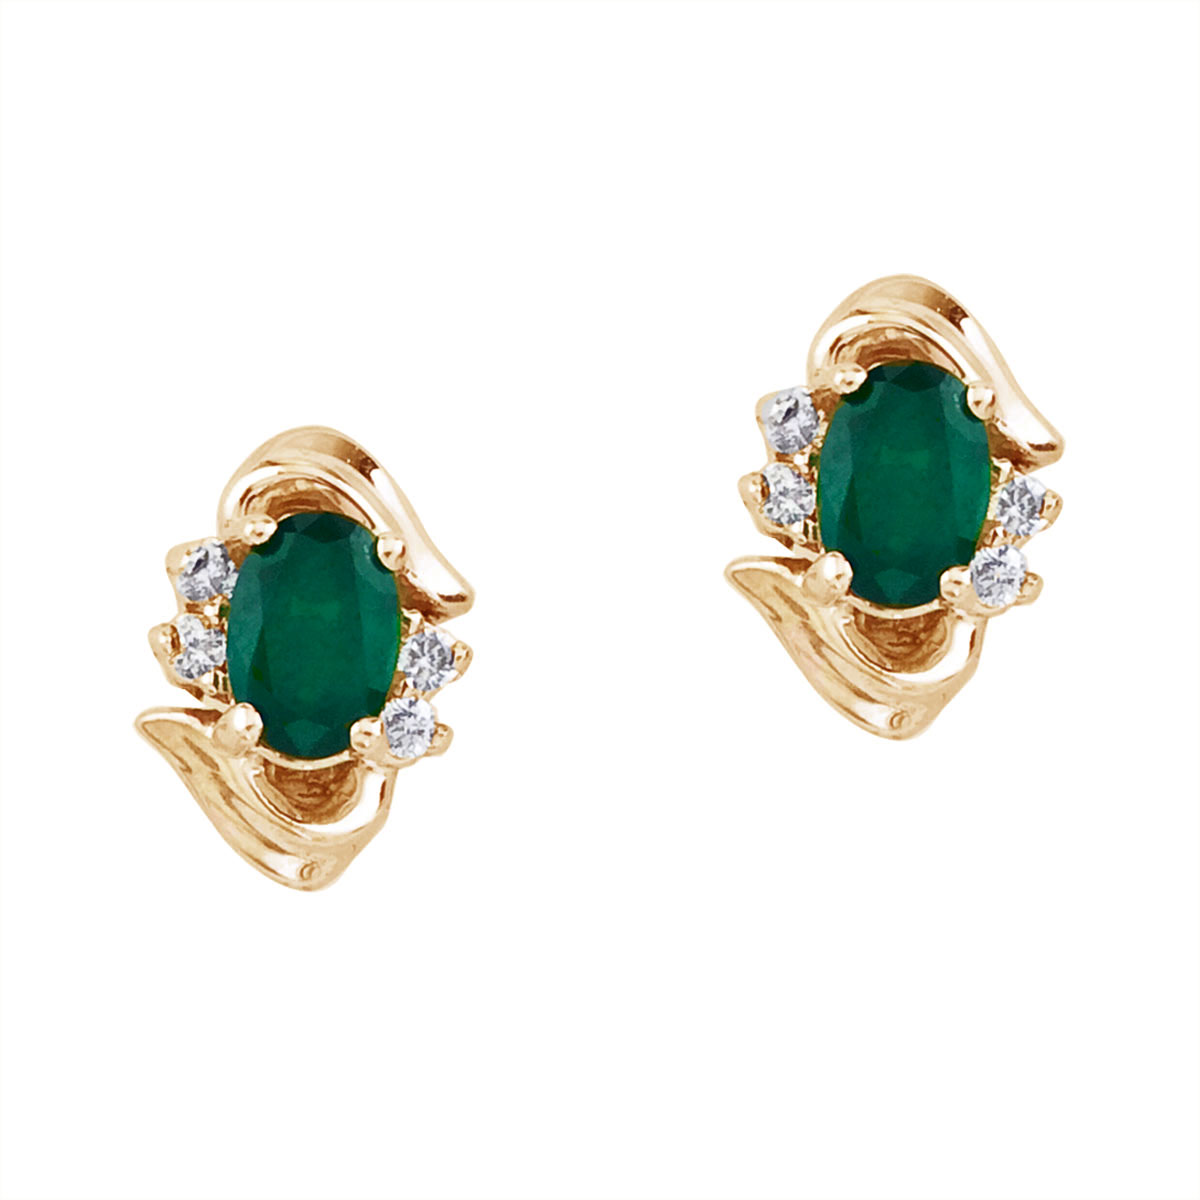 JCX2308: Stunning 14k yellow gold and emerald earrings. Featuring natural 6x4 mm oval emeralds and .11 total carat diamonds.